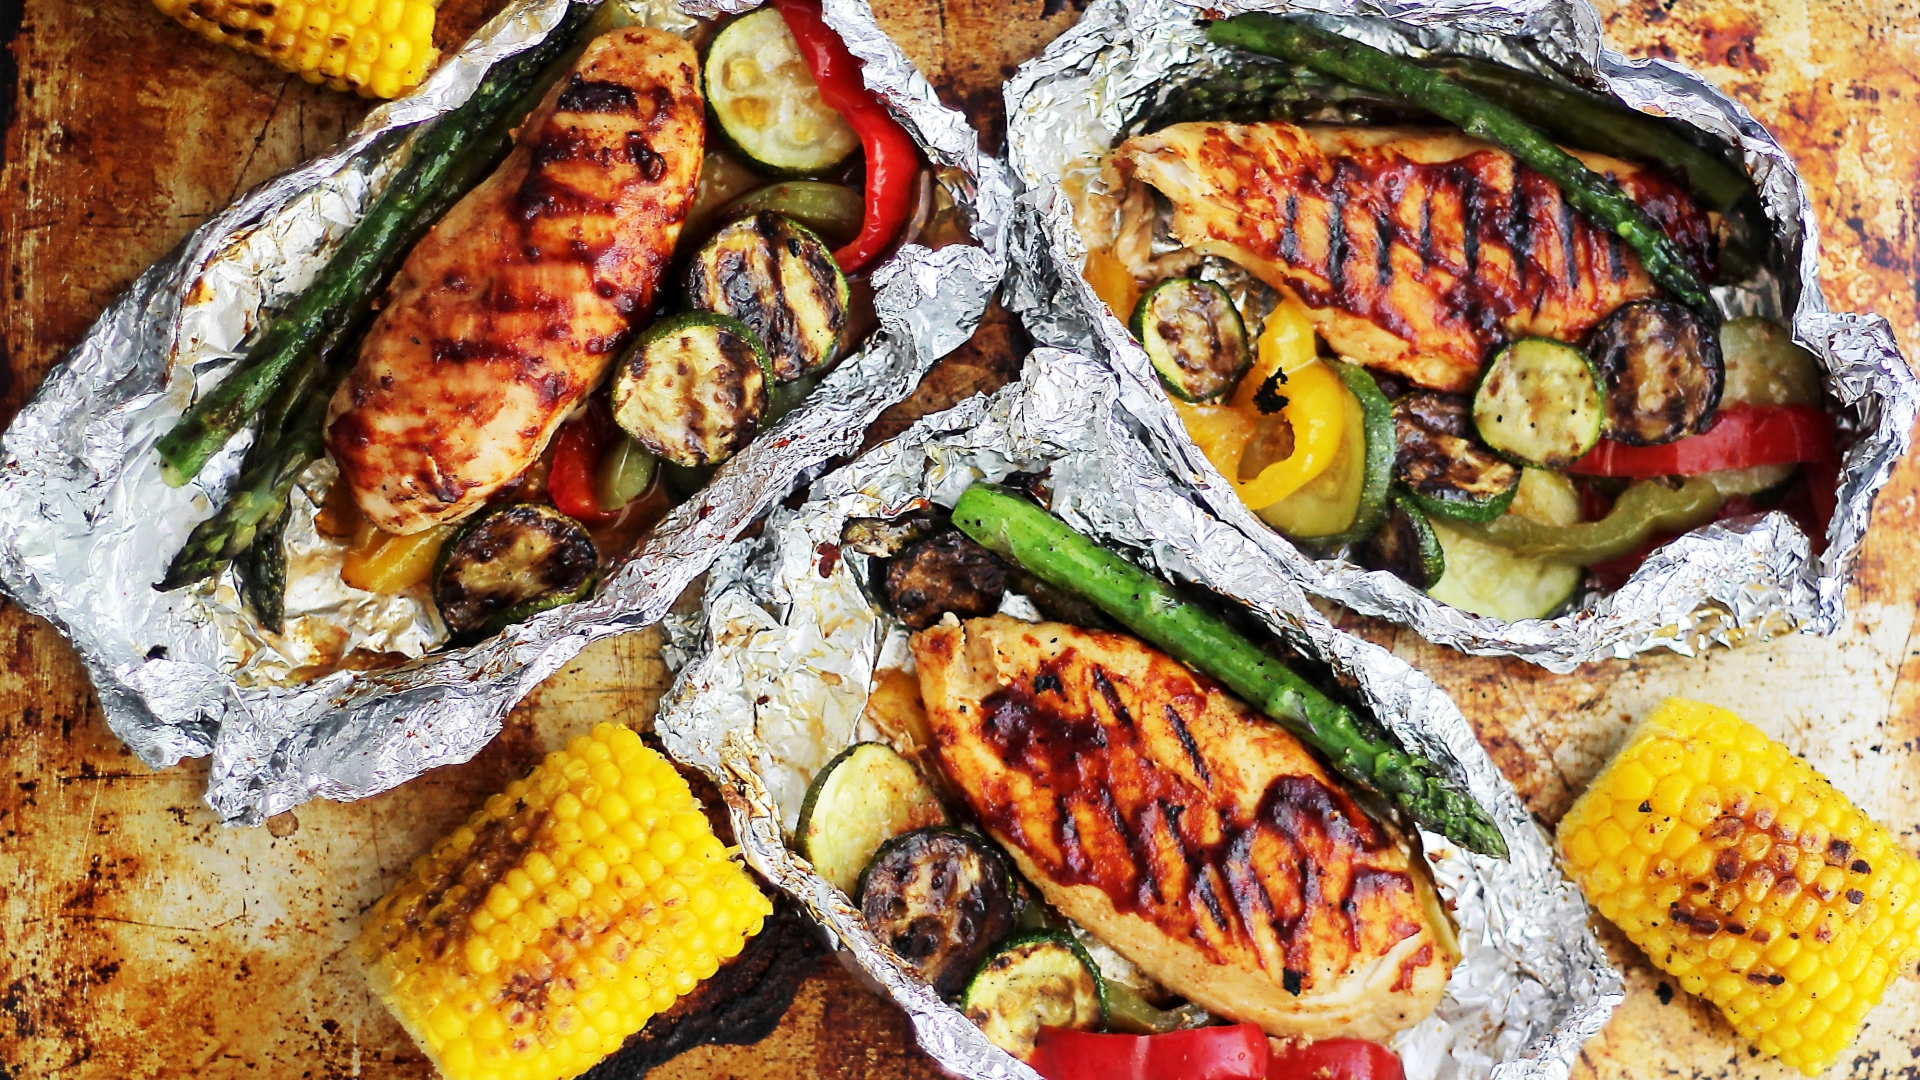 Chicken, asparagus, zucchini and peppers in aluminum foil packets